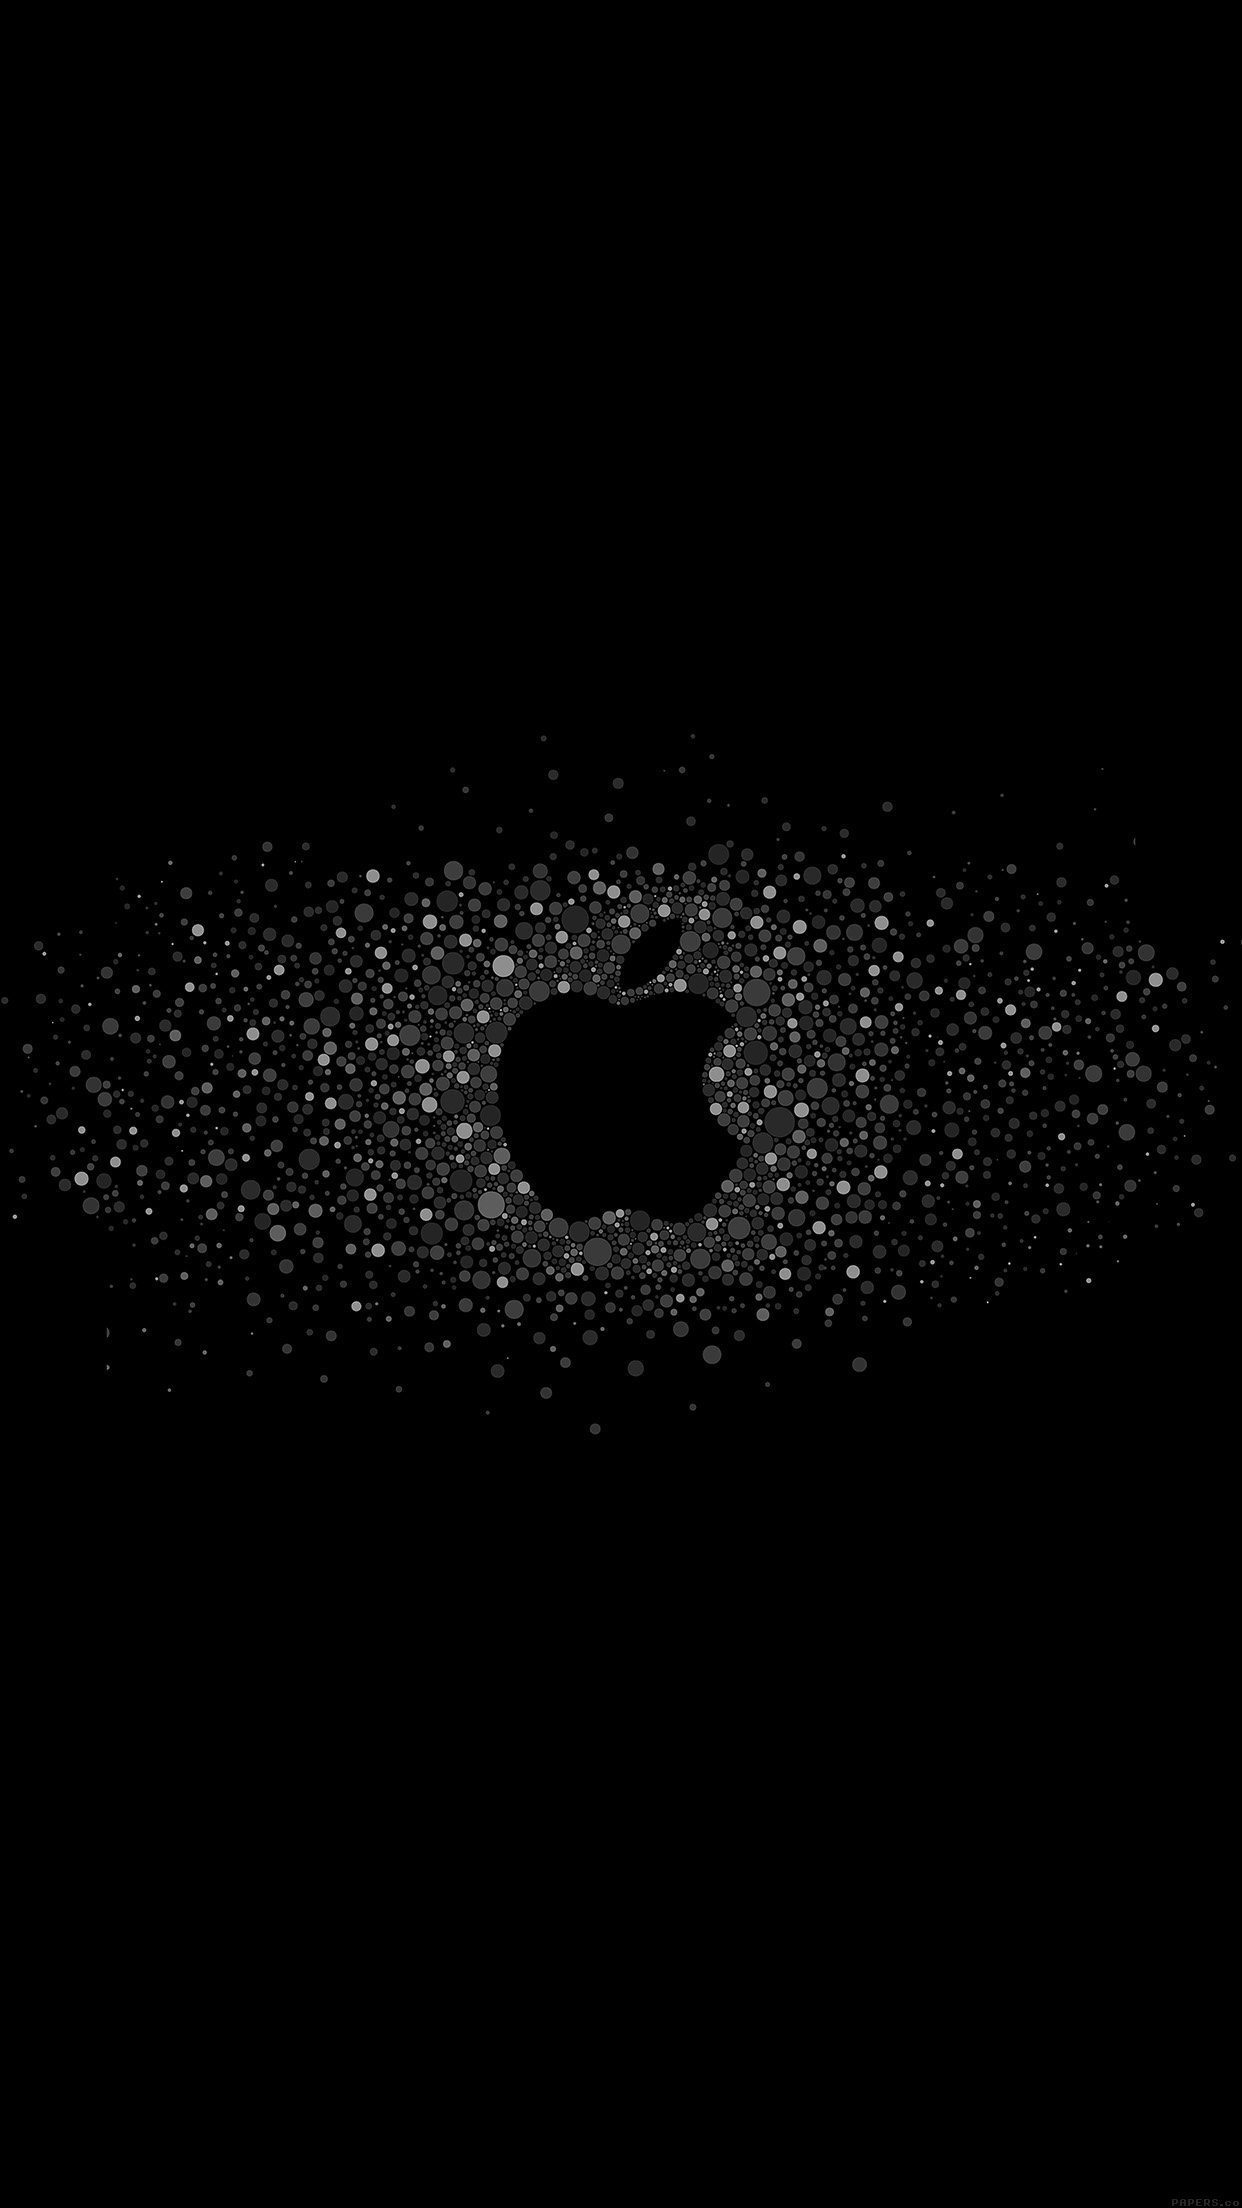 WWDC 2017 wallpapers and logo pack